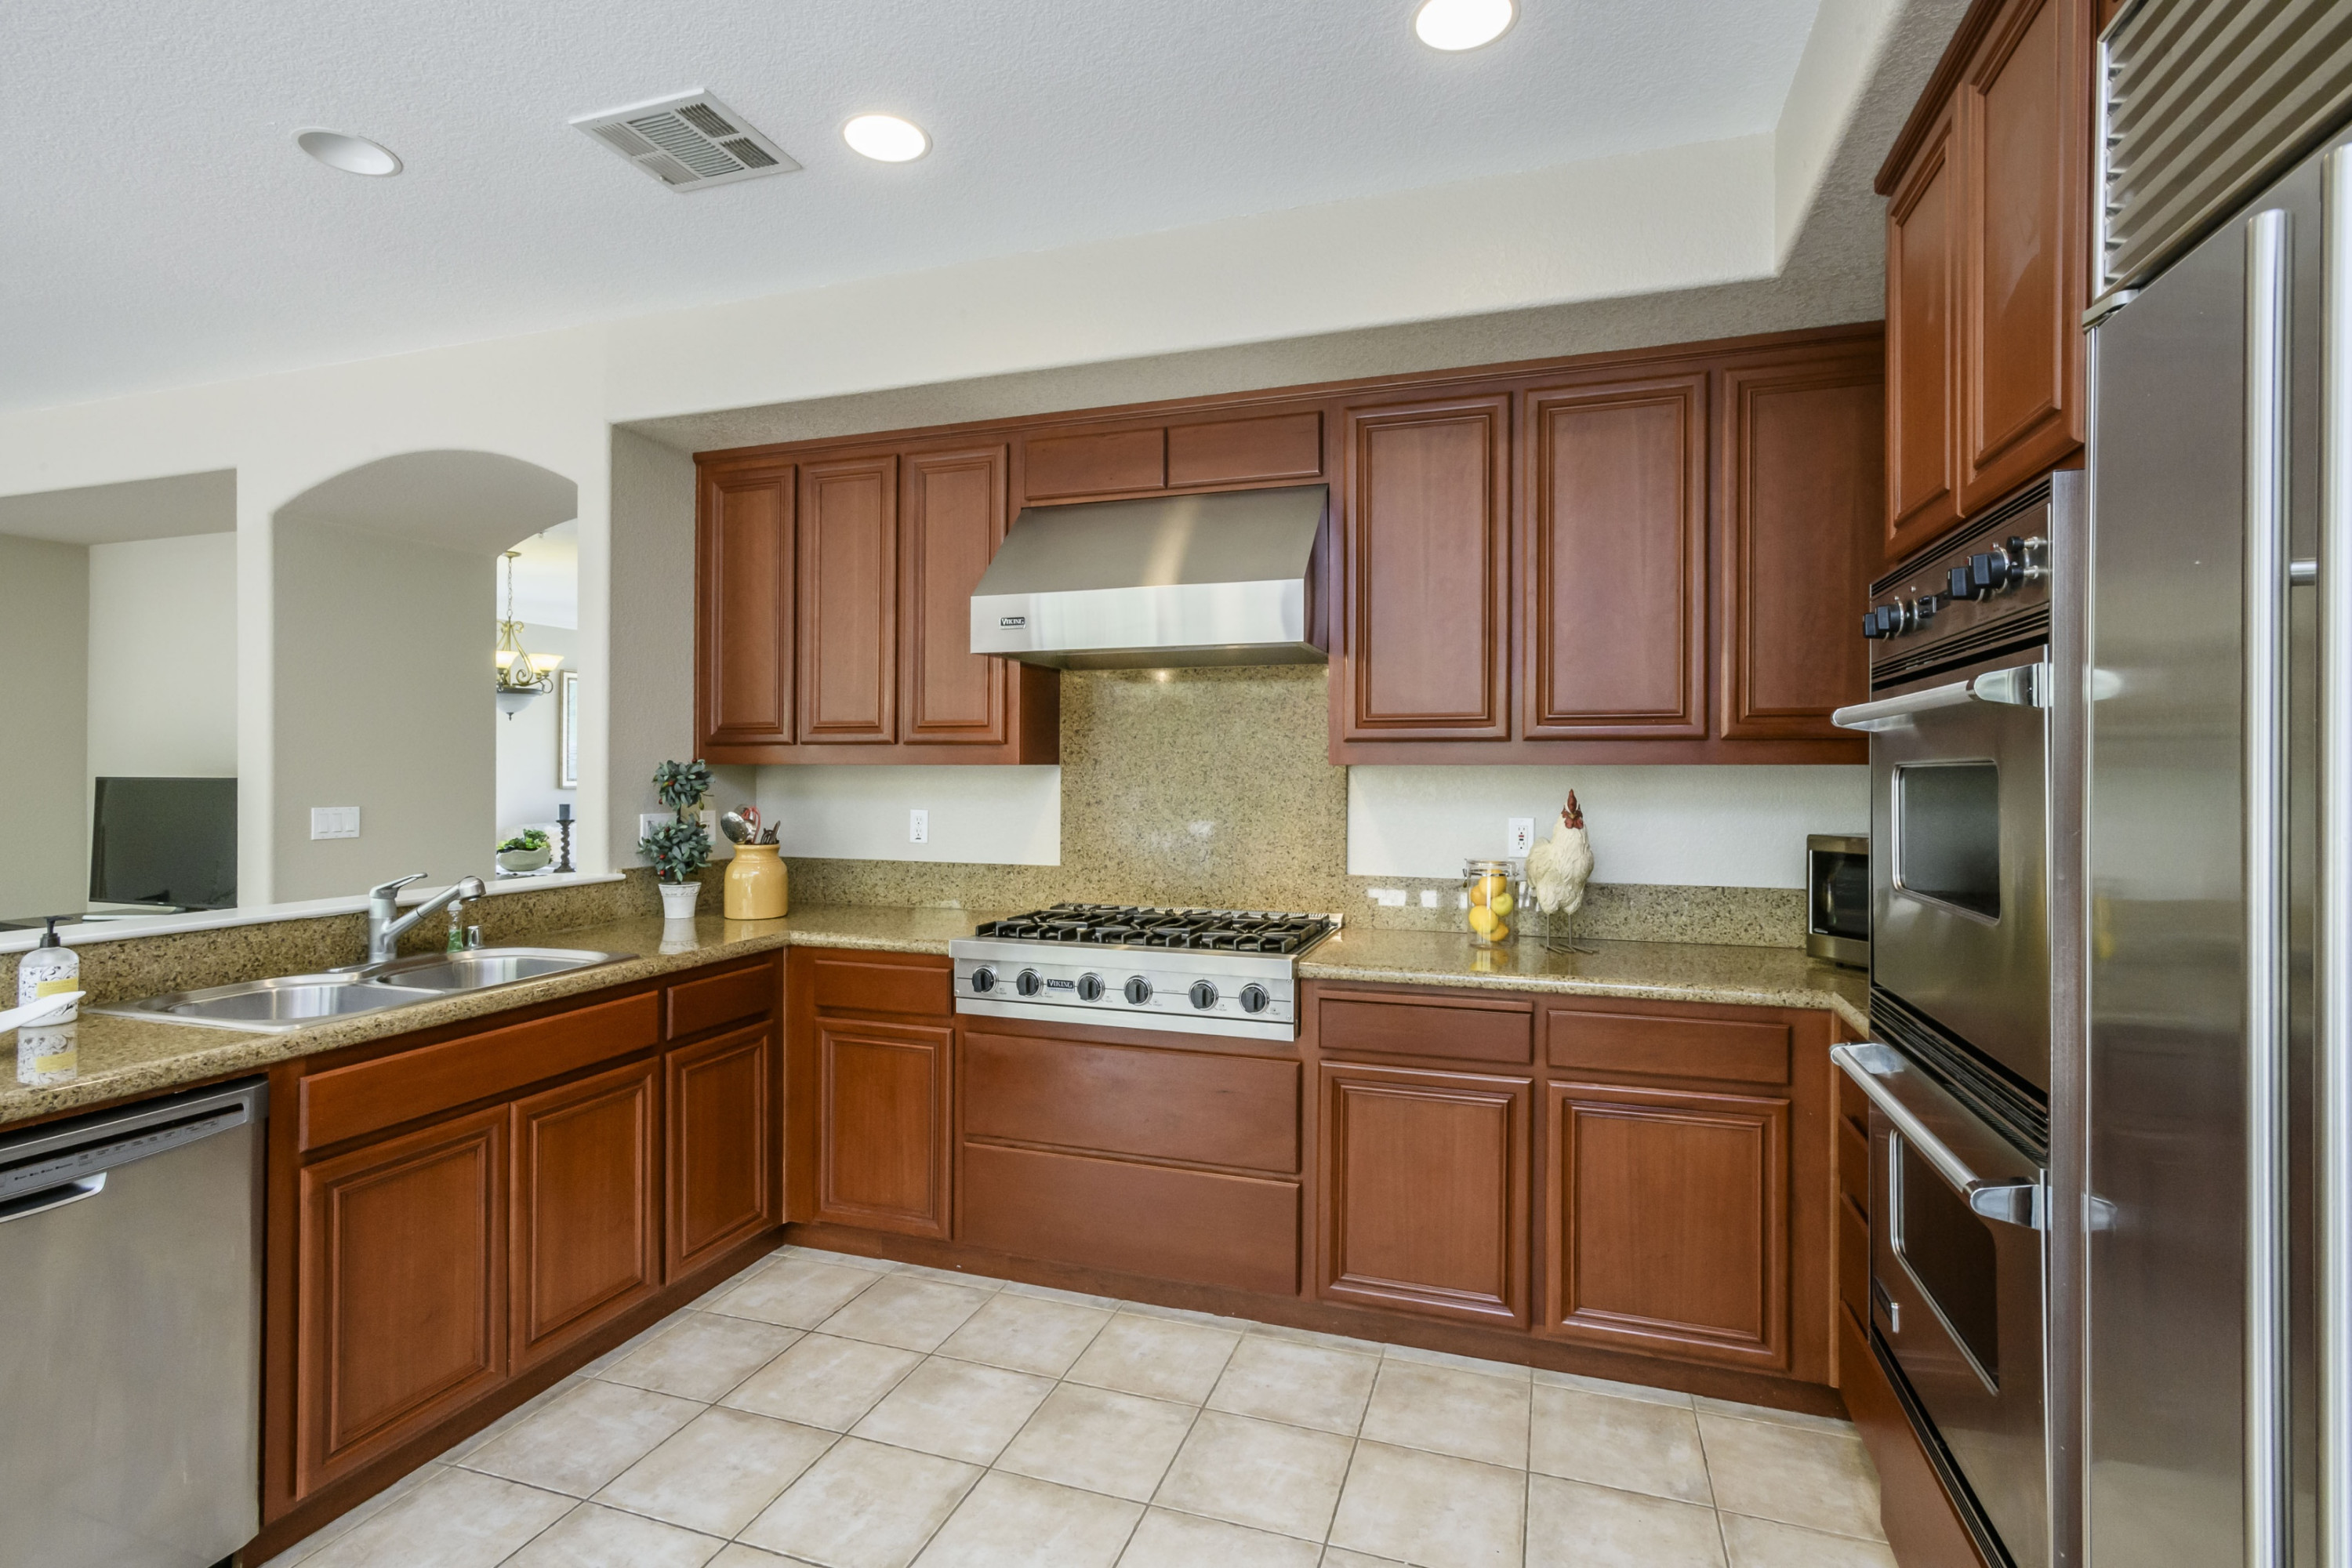 6 West Way Kitchen Cabinetry in Mandalay Heights Neighborhood in South San Francisco.